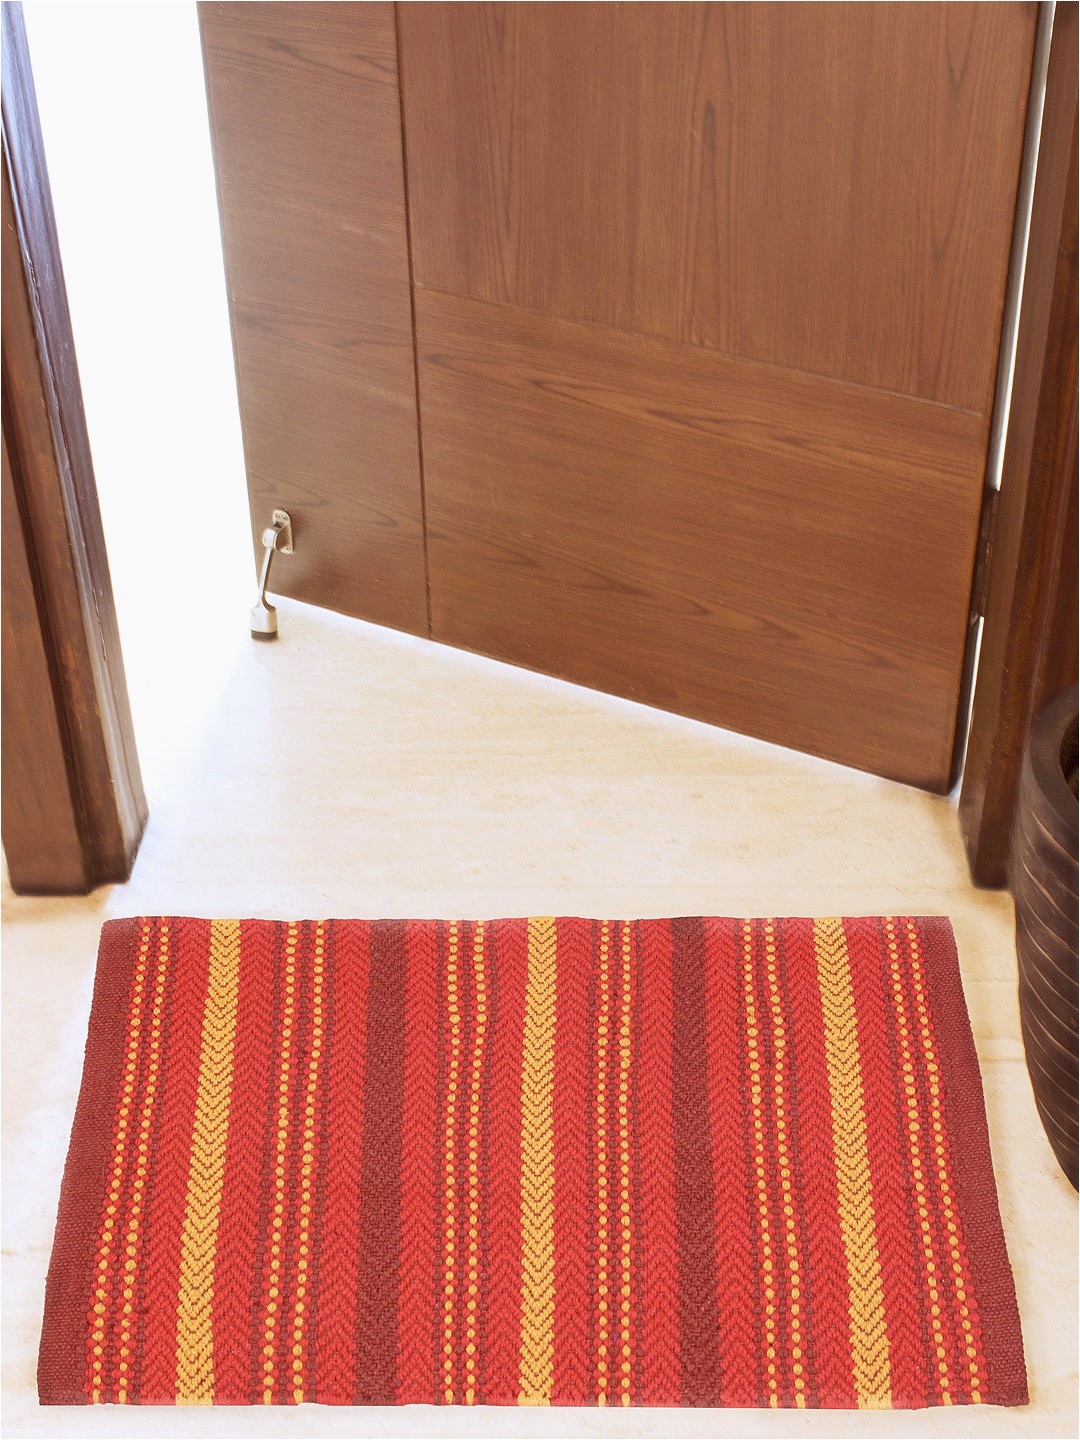 Red and White Bath Rug Buy House This Red Striped Cotton Rectangular Bath Rug